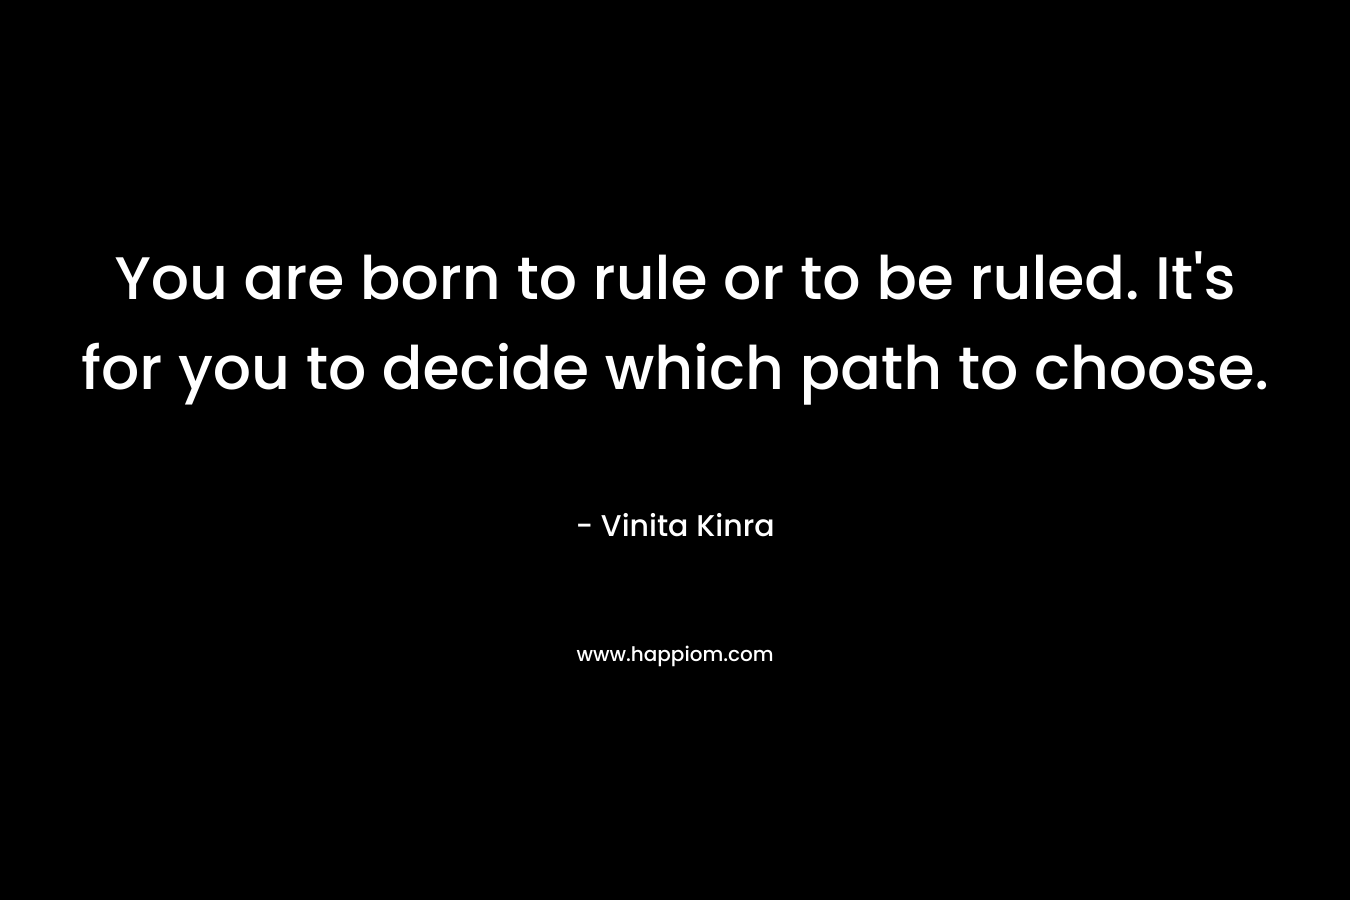 You are born to rule or to be ruled. It's for you to decide which path to choose.